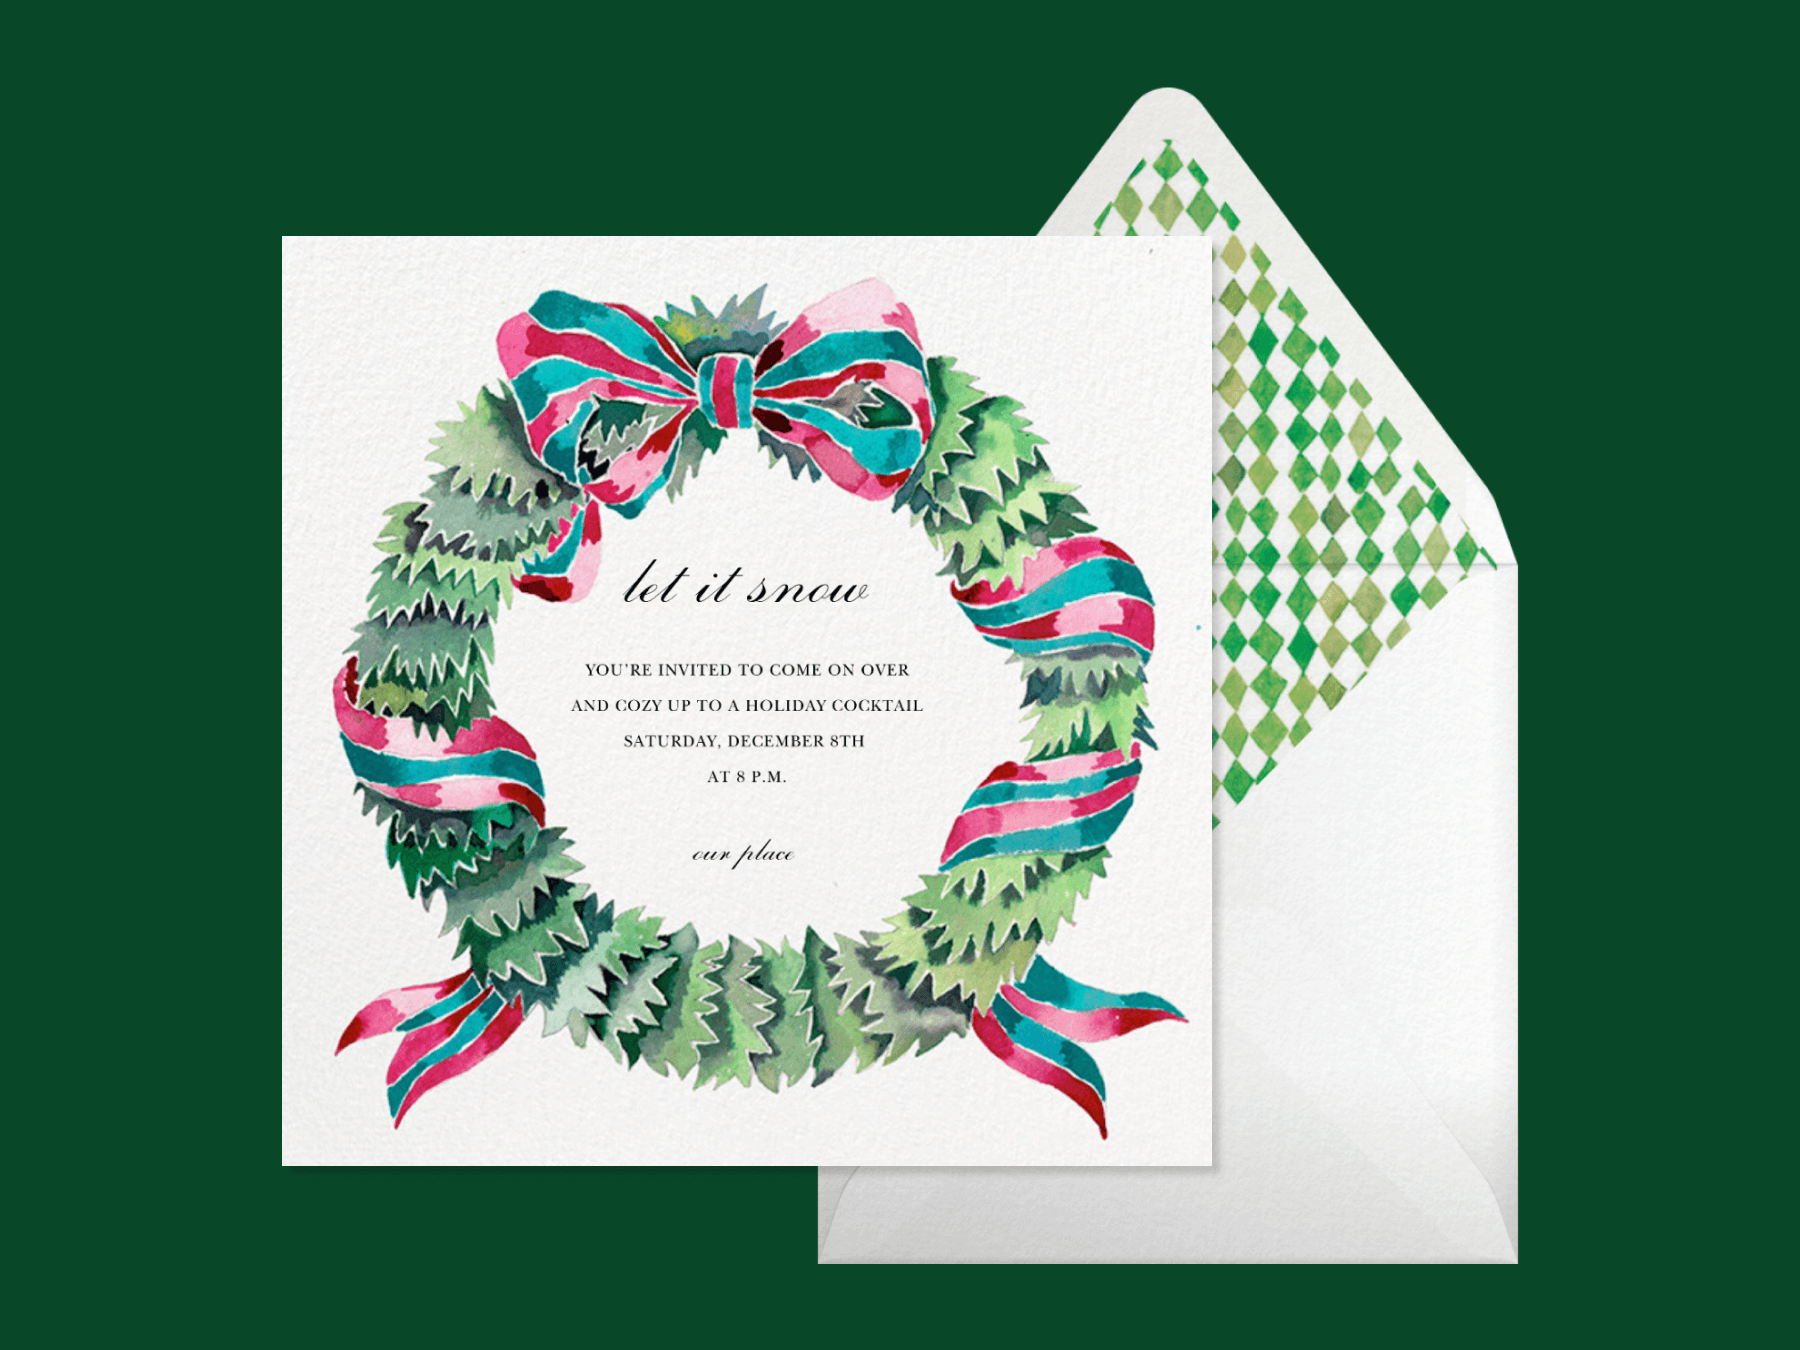 A holiday party invitation with a wreath around the text.